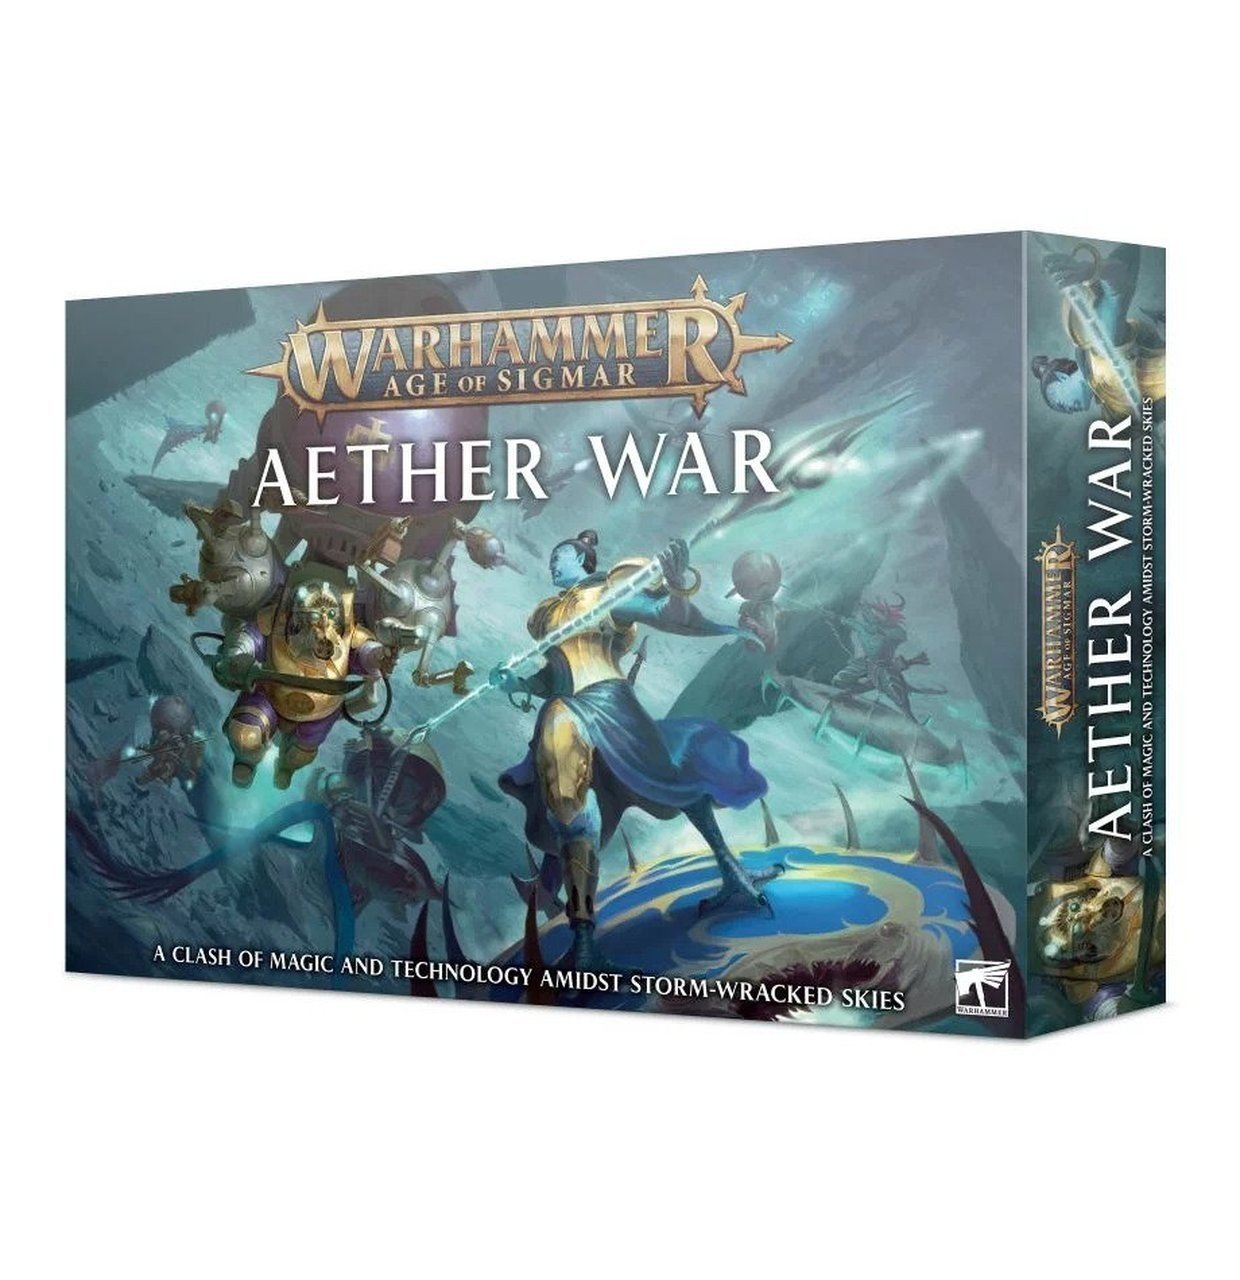 AW-60 AGE OF SIGMAR: AETHER WAR (ENGLISH) - Good Games